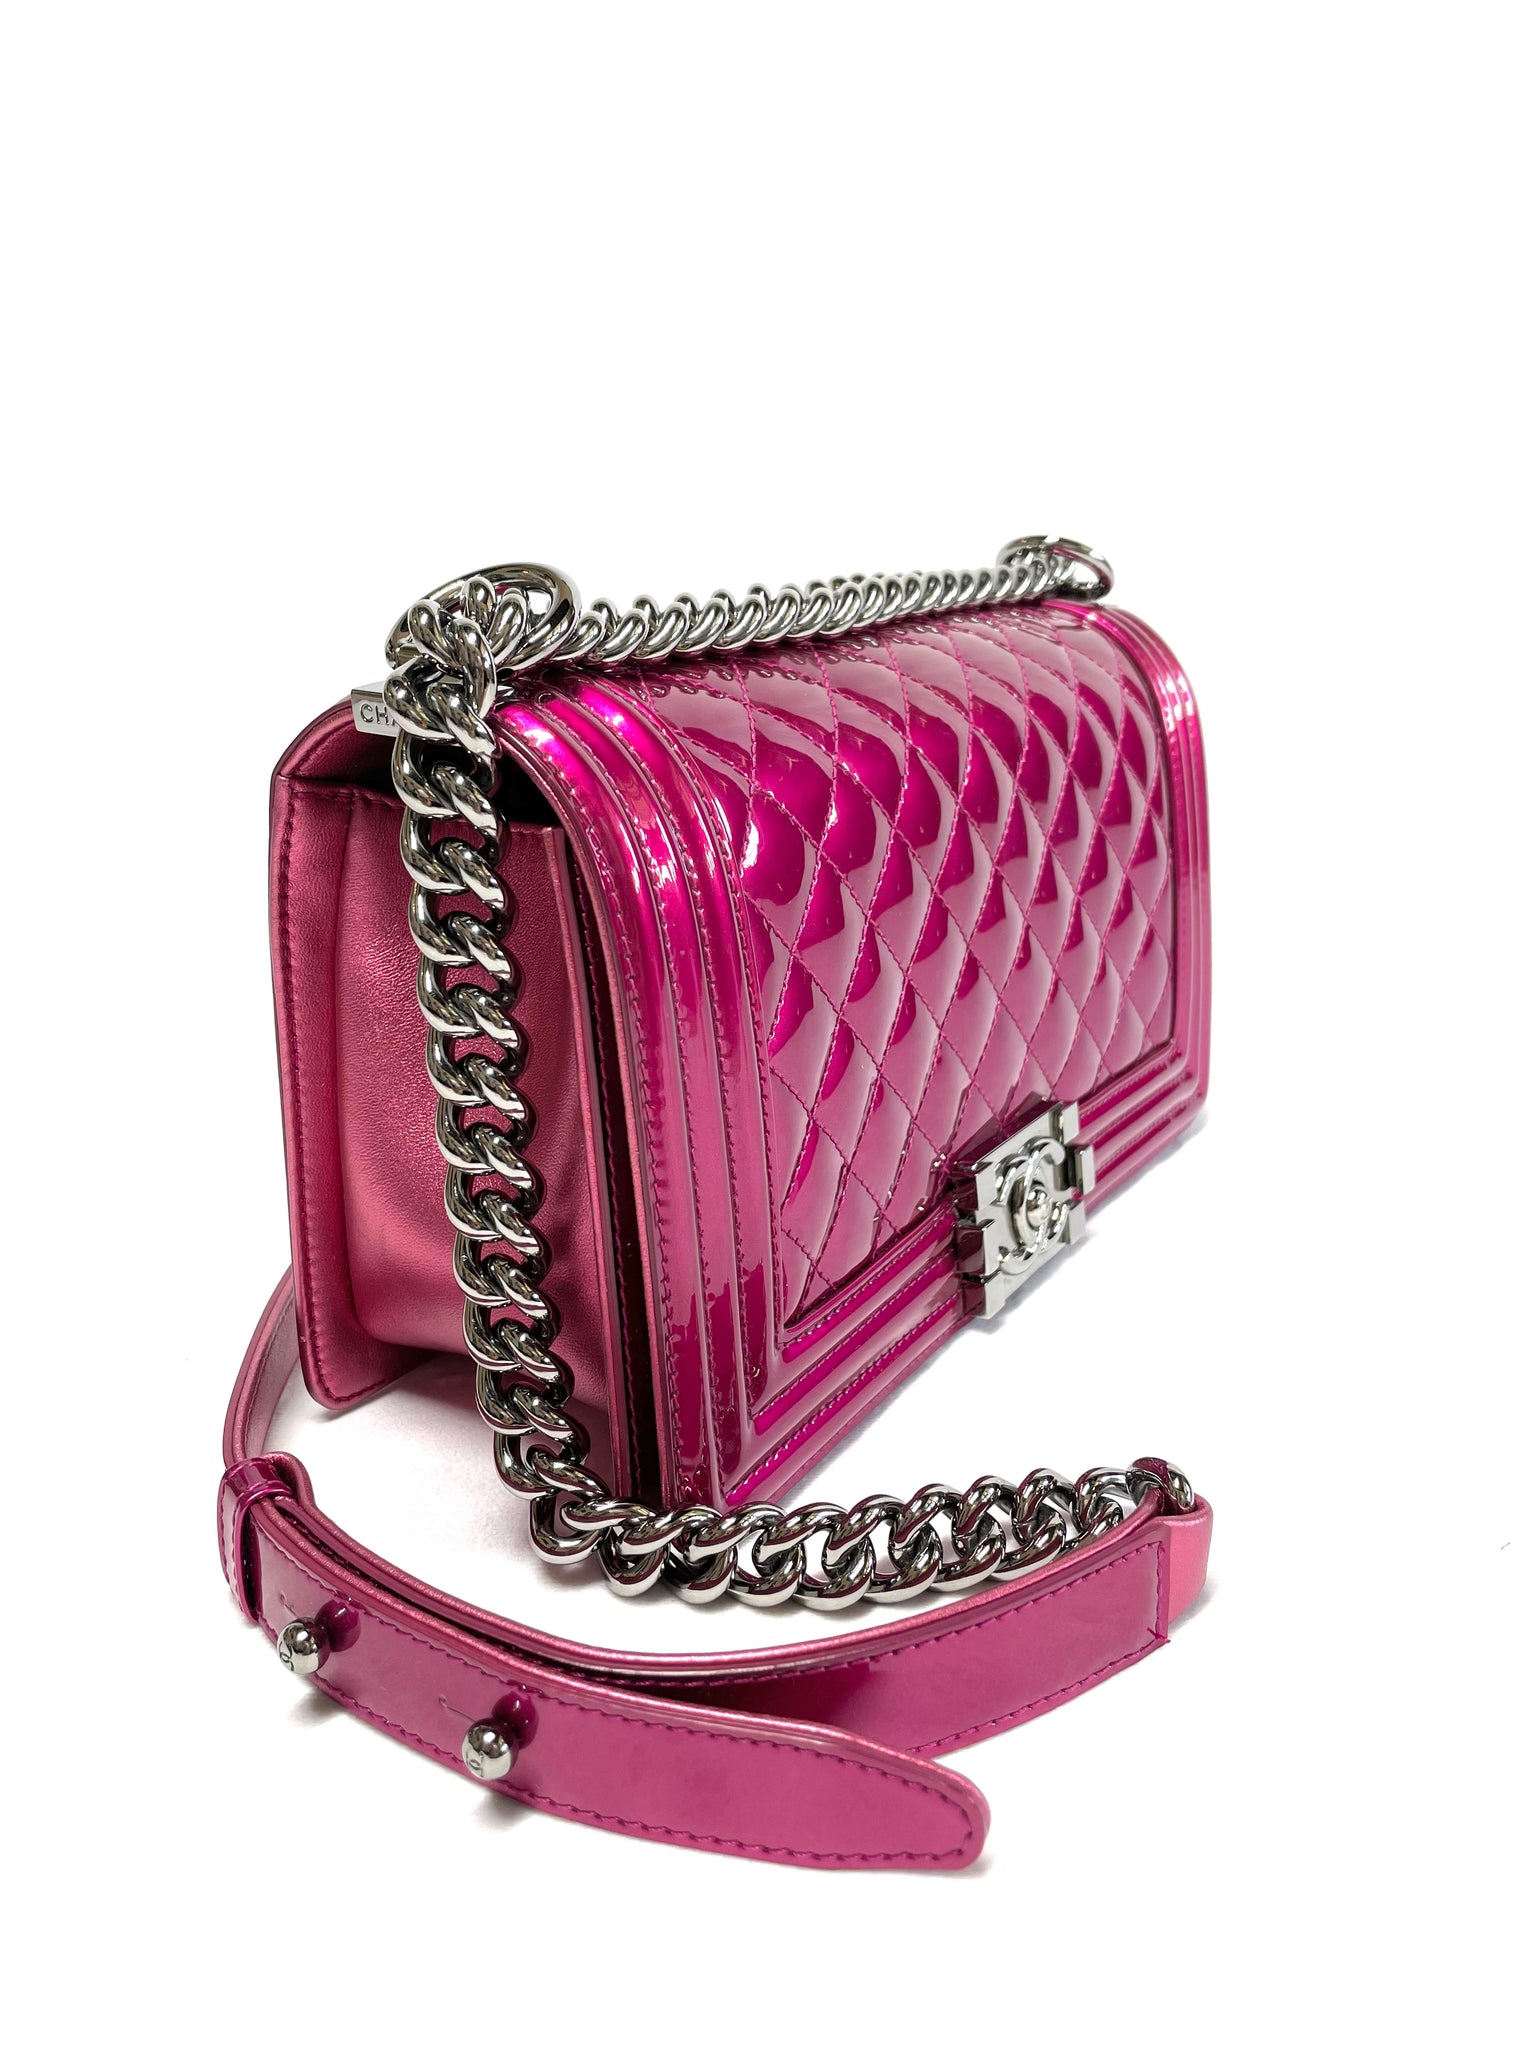 Photo of Chanel Medium Fuchsia Patent Boy Bag *limited edition* available at UniKoncept in Waterloo